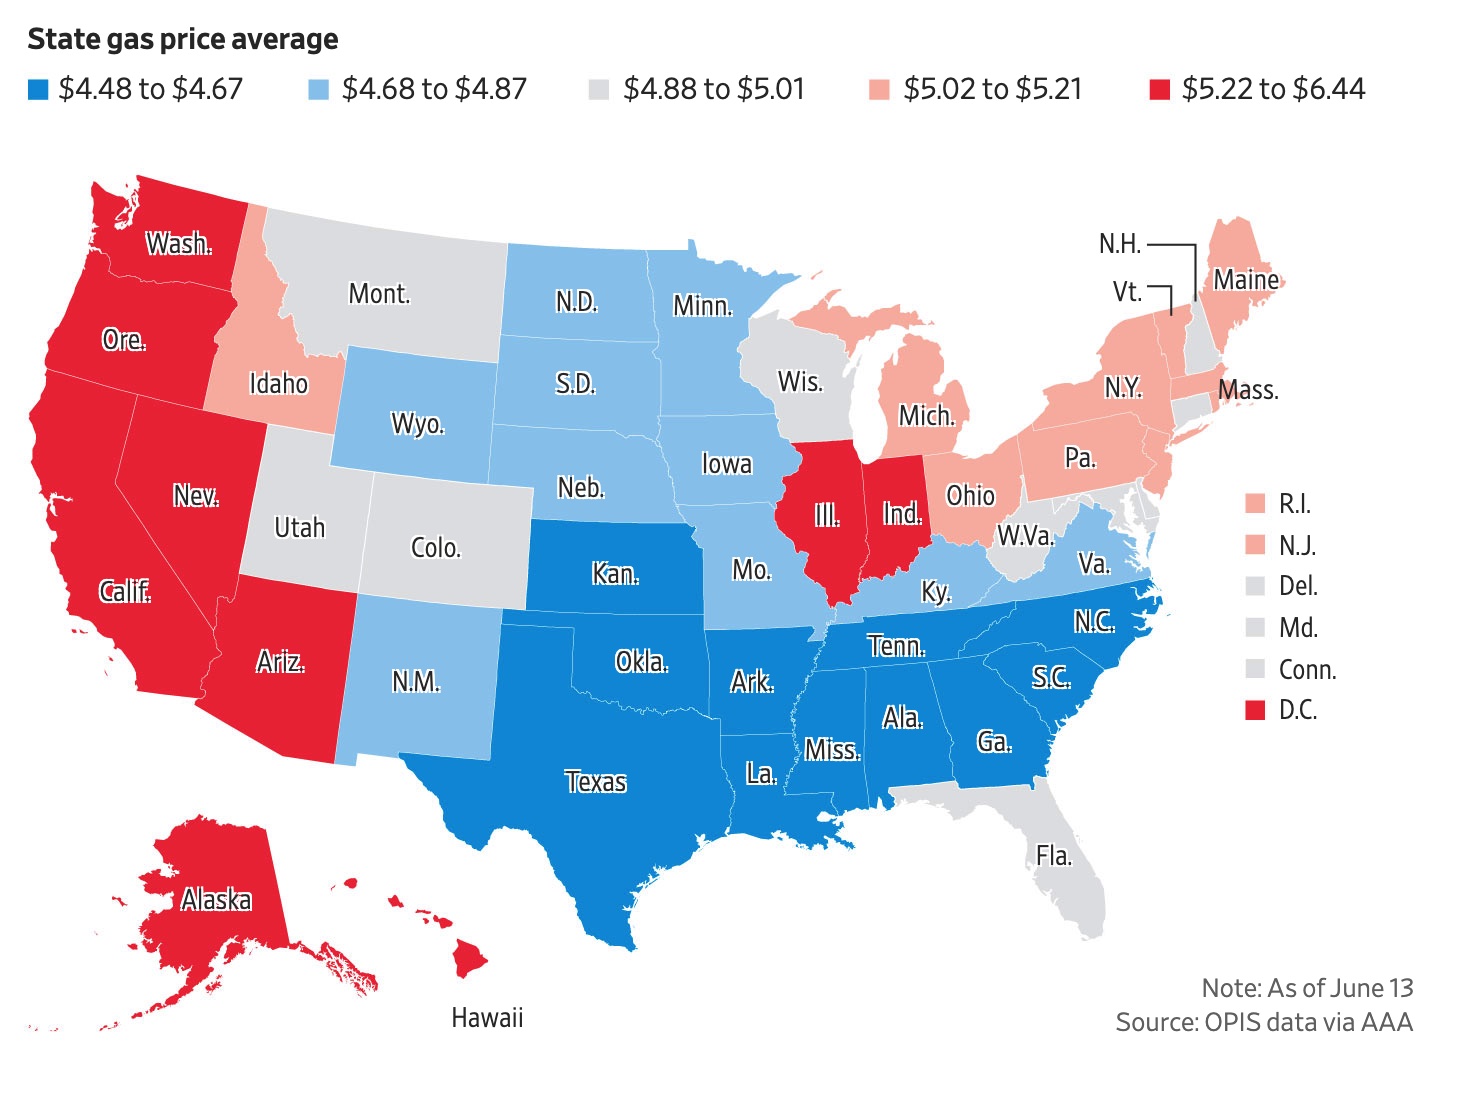 State gas prices